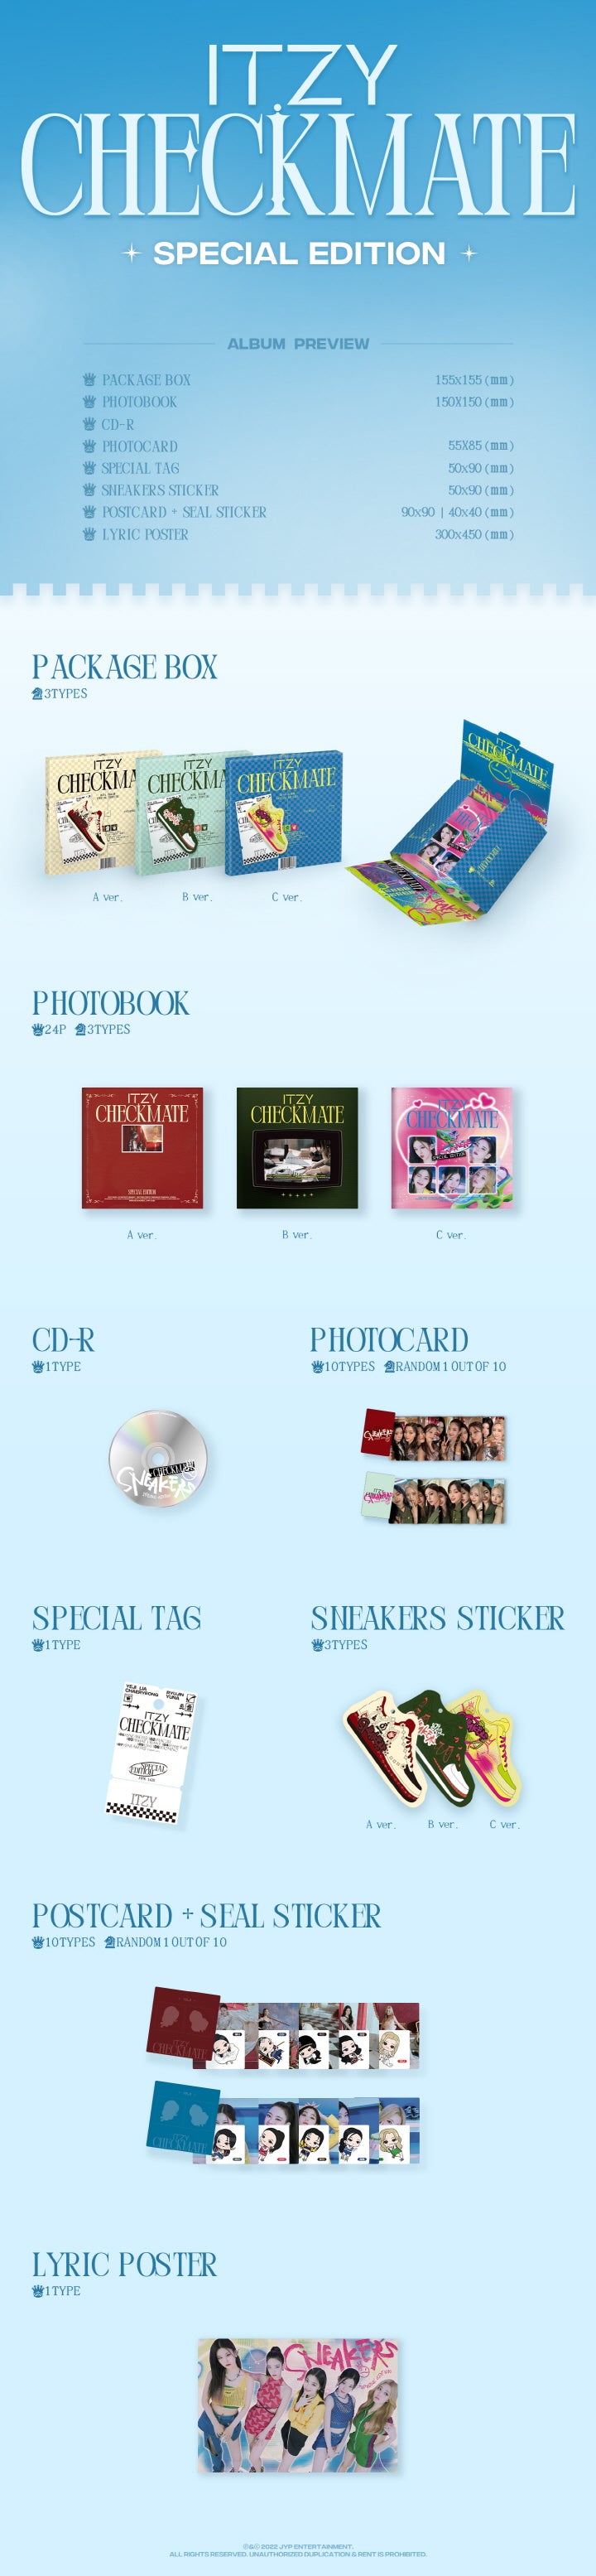 1 CD
1 Photo Book (24 pages)
1 Photo Card (random out of 10 types)
1 Special Tag
1 Sneakers Sticker
1 Postcard + Seal Stic...